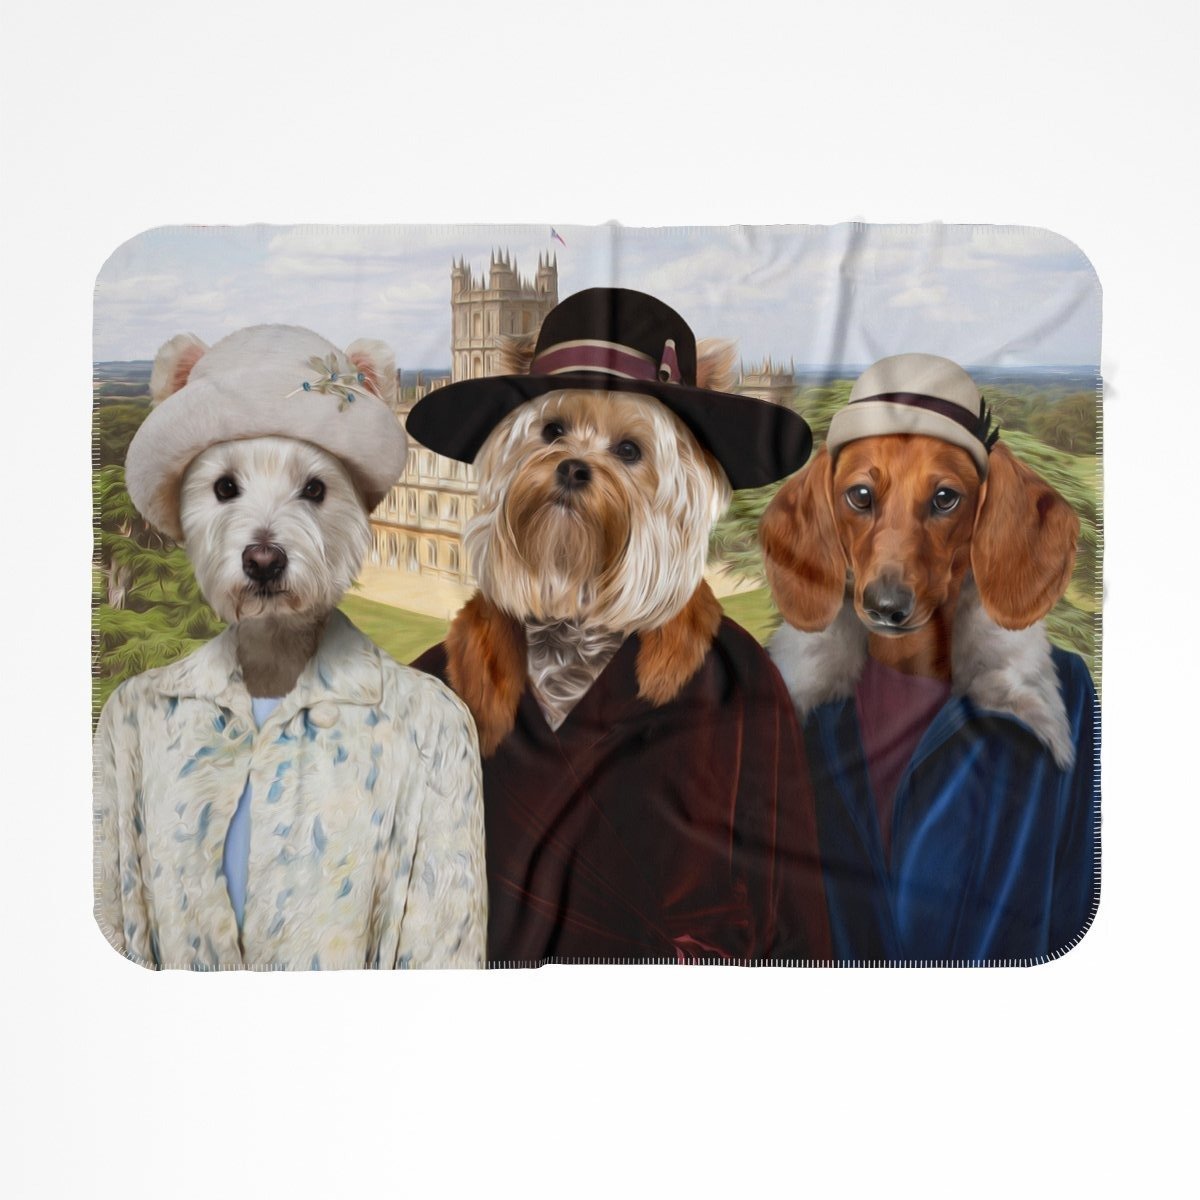 Downton Ladies: Custom Pet Blanket - Paw & Glory - #pet portraits# - #dog portraits# - #pet portraits uk#Paw and glory, Pet portraits blanket,blanket with pet on it, personalized blanket with dog, printed dog blanket, blankets with your dog on it, custom blanket with dogs face